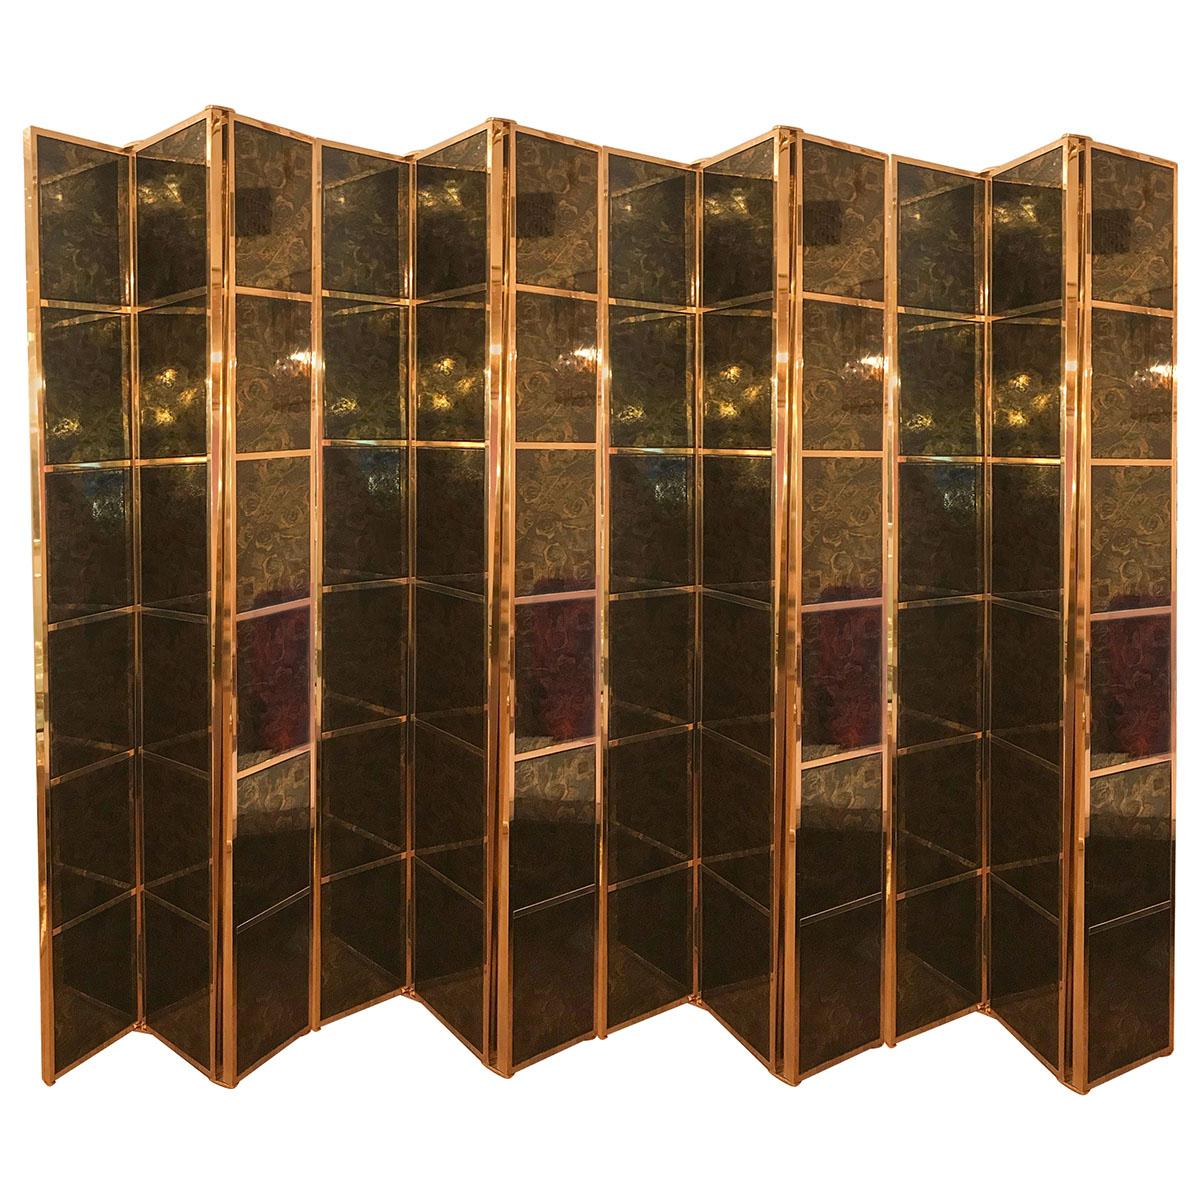 Brass Folding Screen with Inset Vintage Ceramic Panels